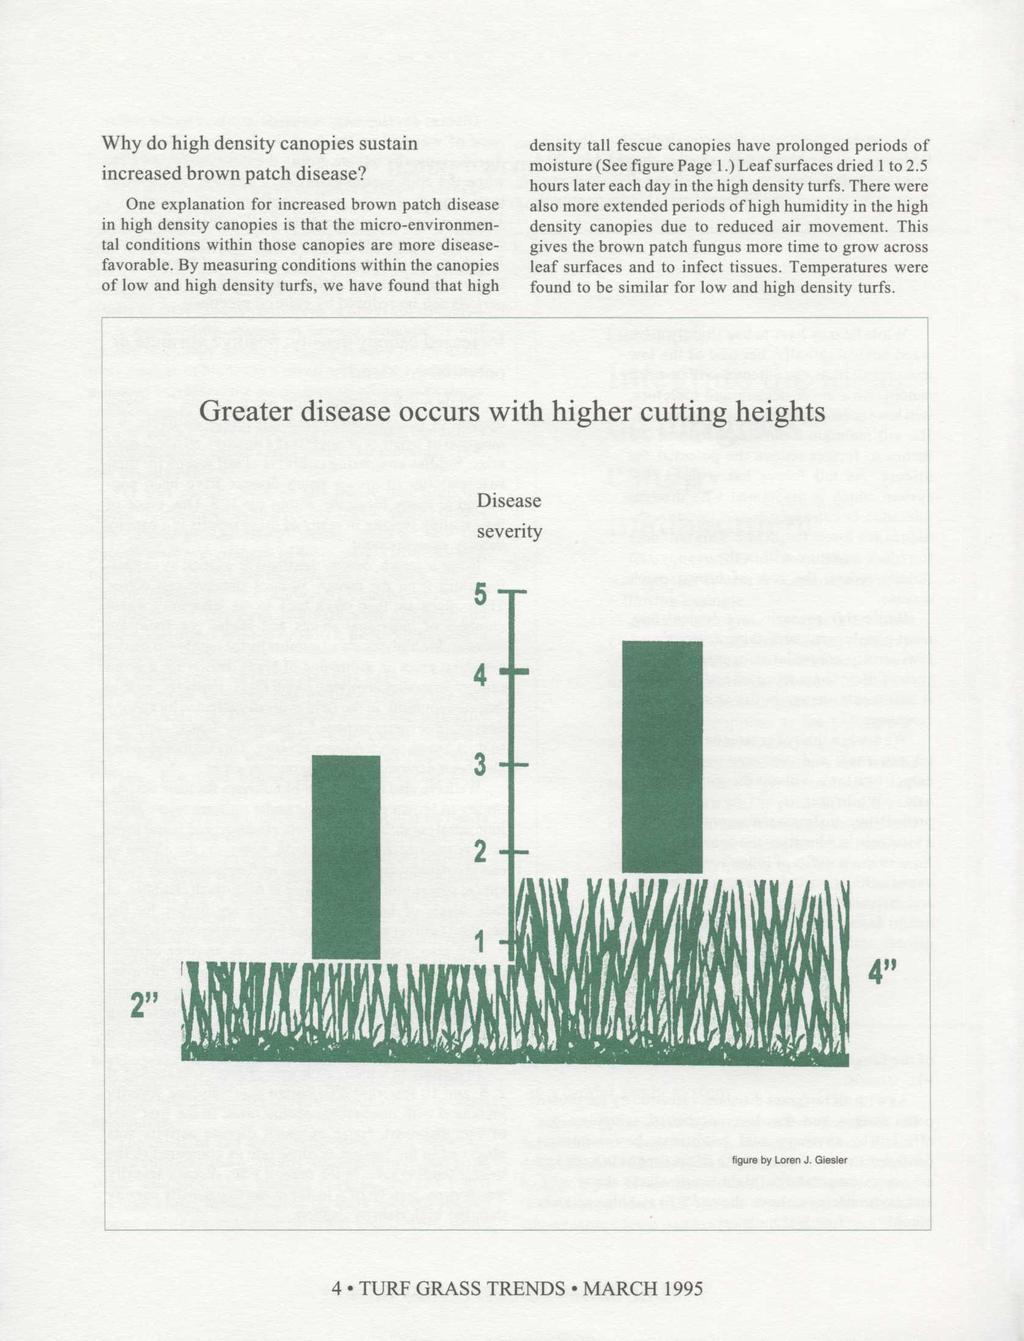 Why do high density canopies sustain increased brown patch disease?